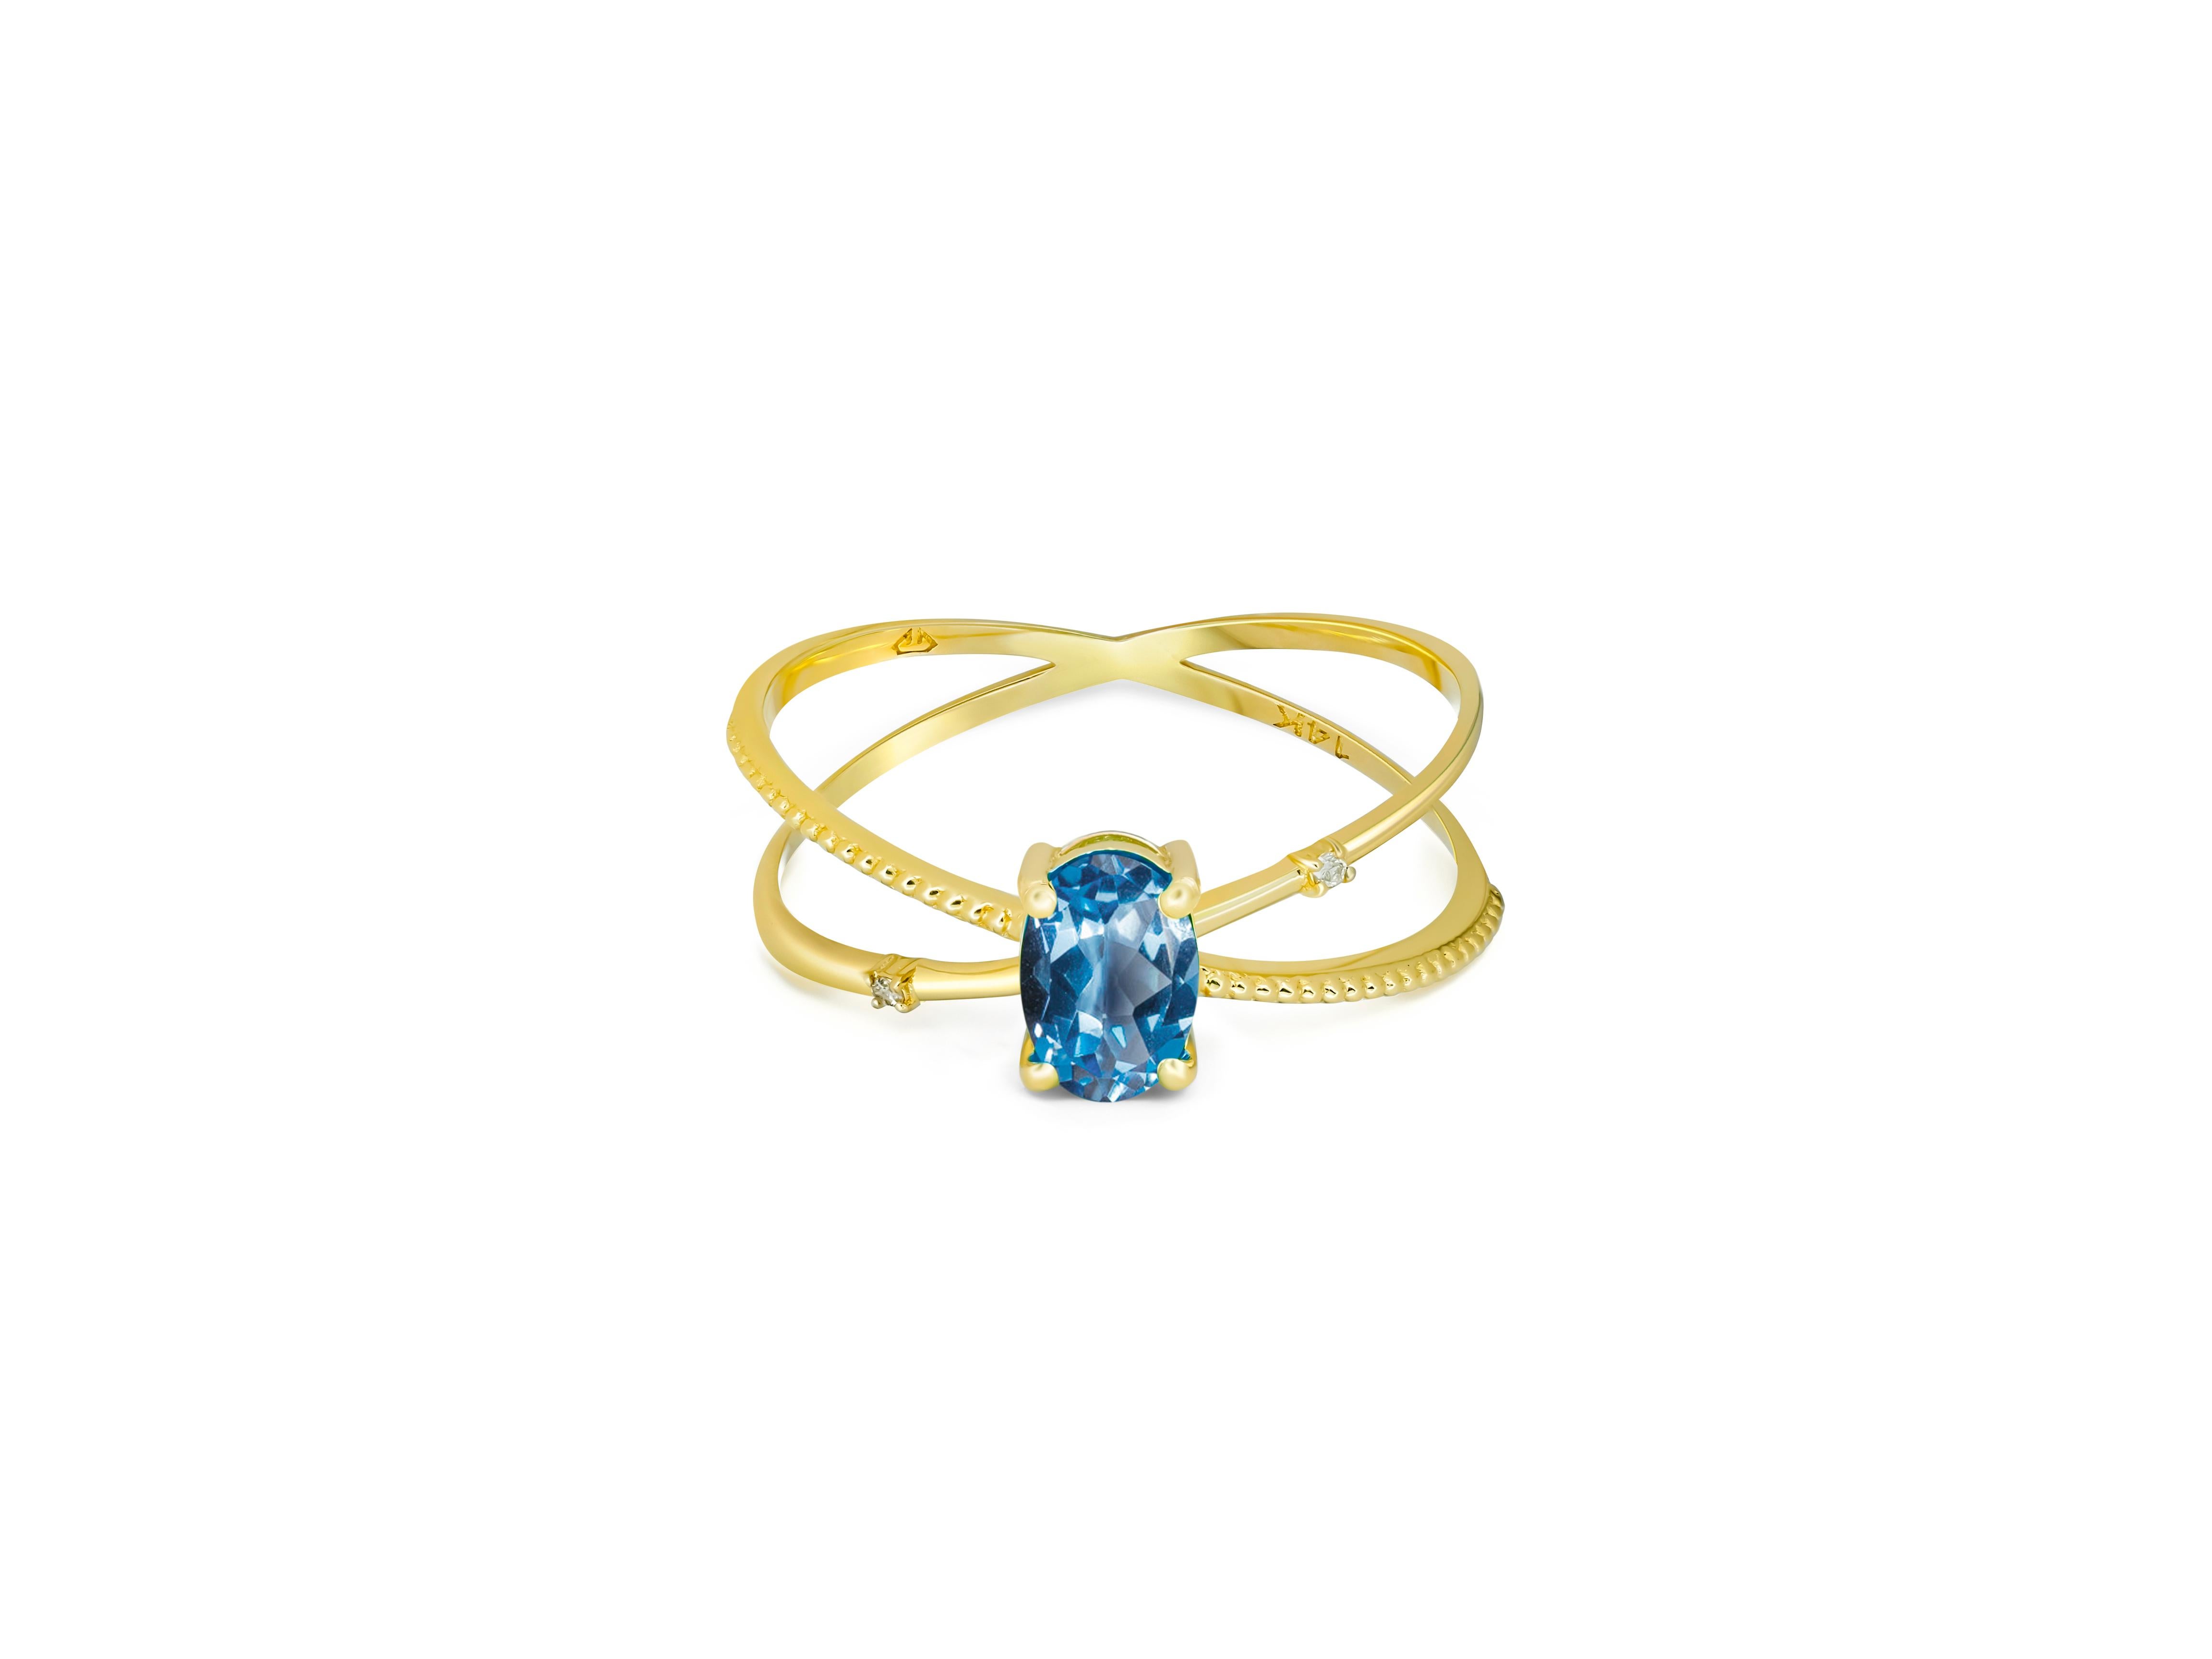 Casual topaz ring. 
Topaz spiral ring. Oval Topaz ring. Sky blue Topaz 14k gold ring. Minimalist Topaz ring. Topaz engagement ring.

Metal: 14k gold
Total weight: 1.9 g  depends from size.

Main Stone: Topaz
Shape: Oval  
Total Carat Weight: aprox 1